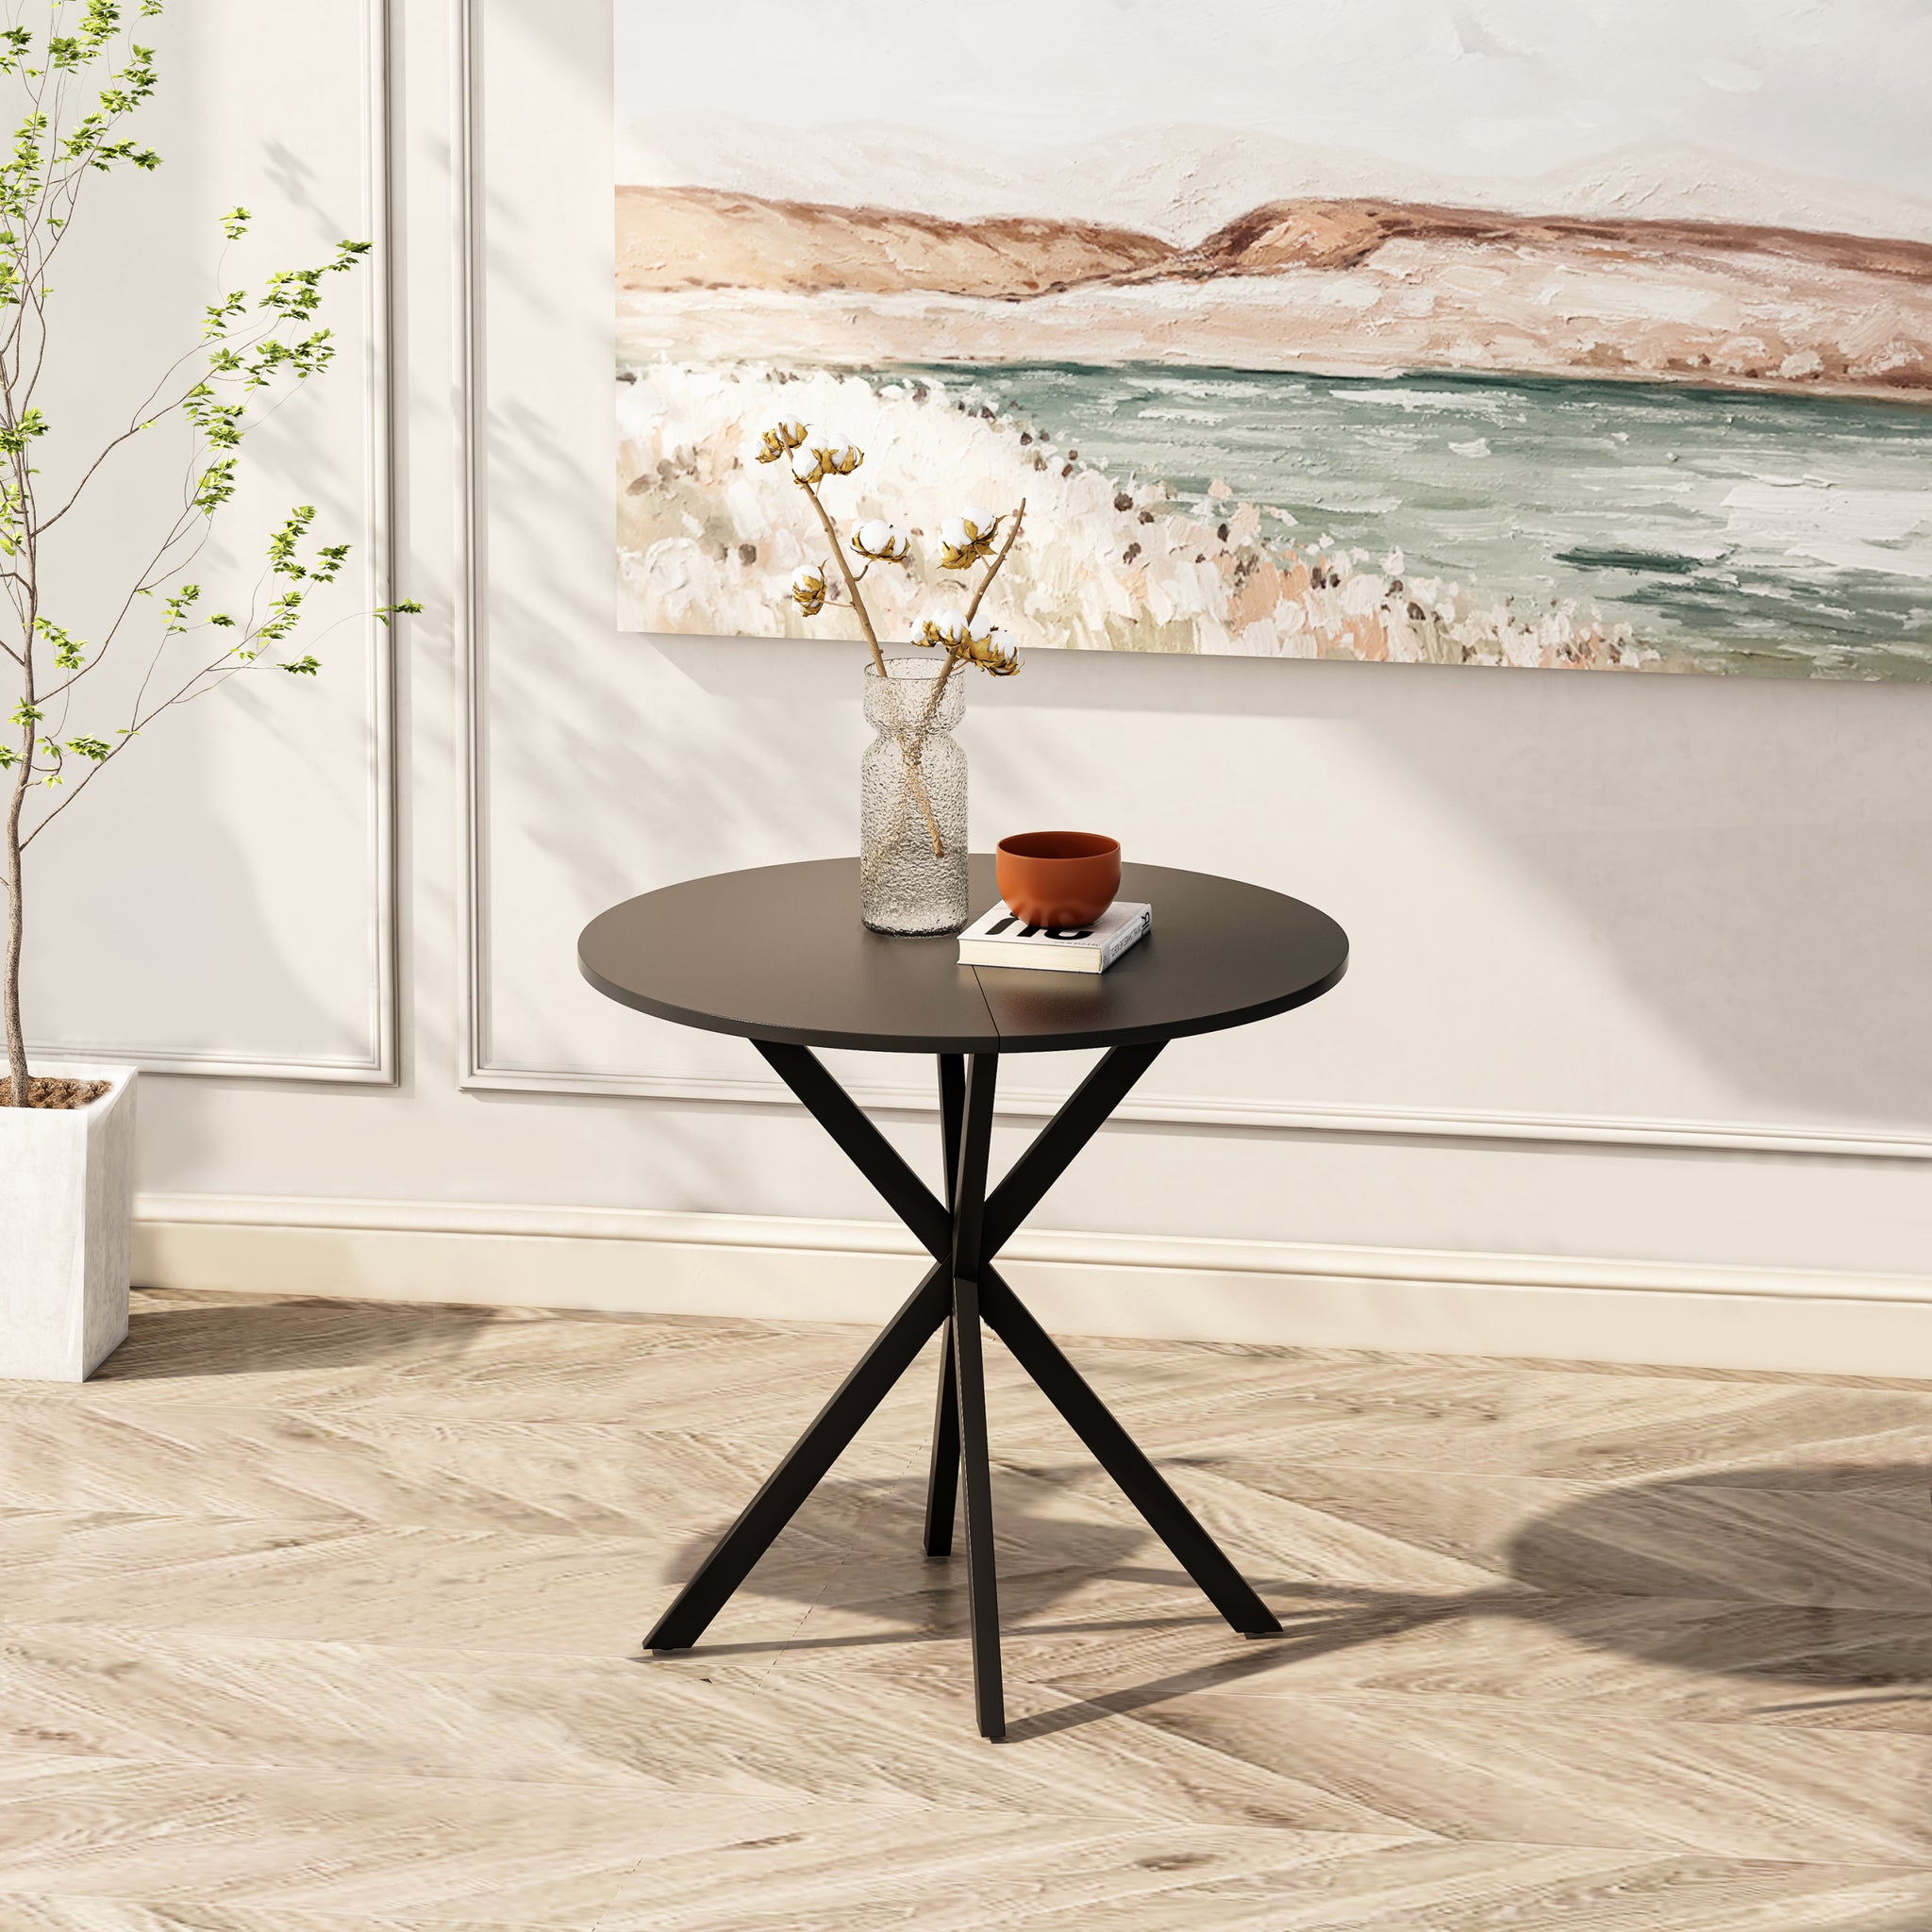 31.5'' Modern Round Dining Table with Crossed Legs black-mdf+metal